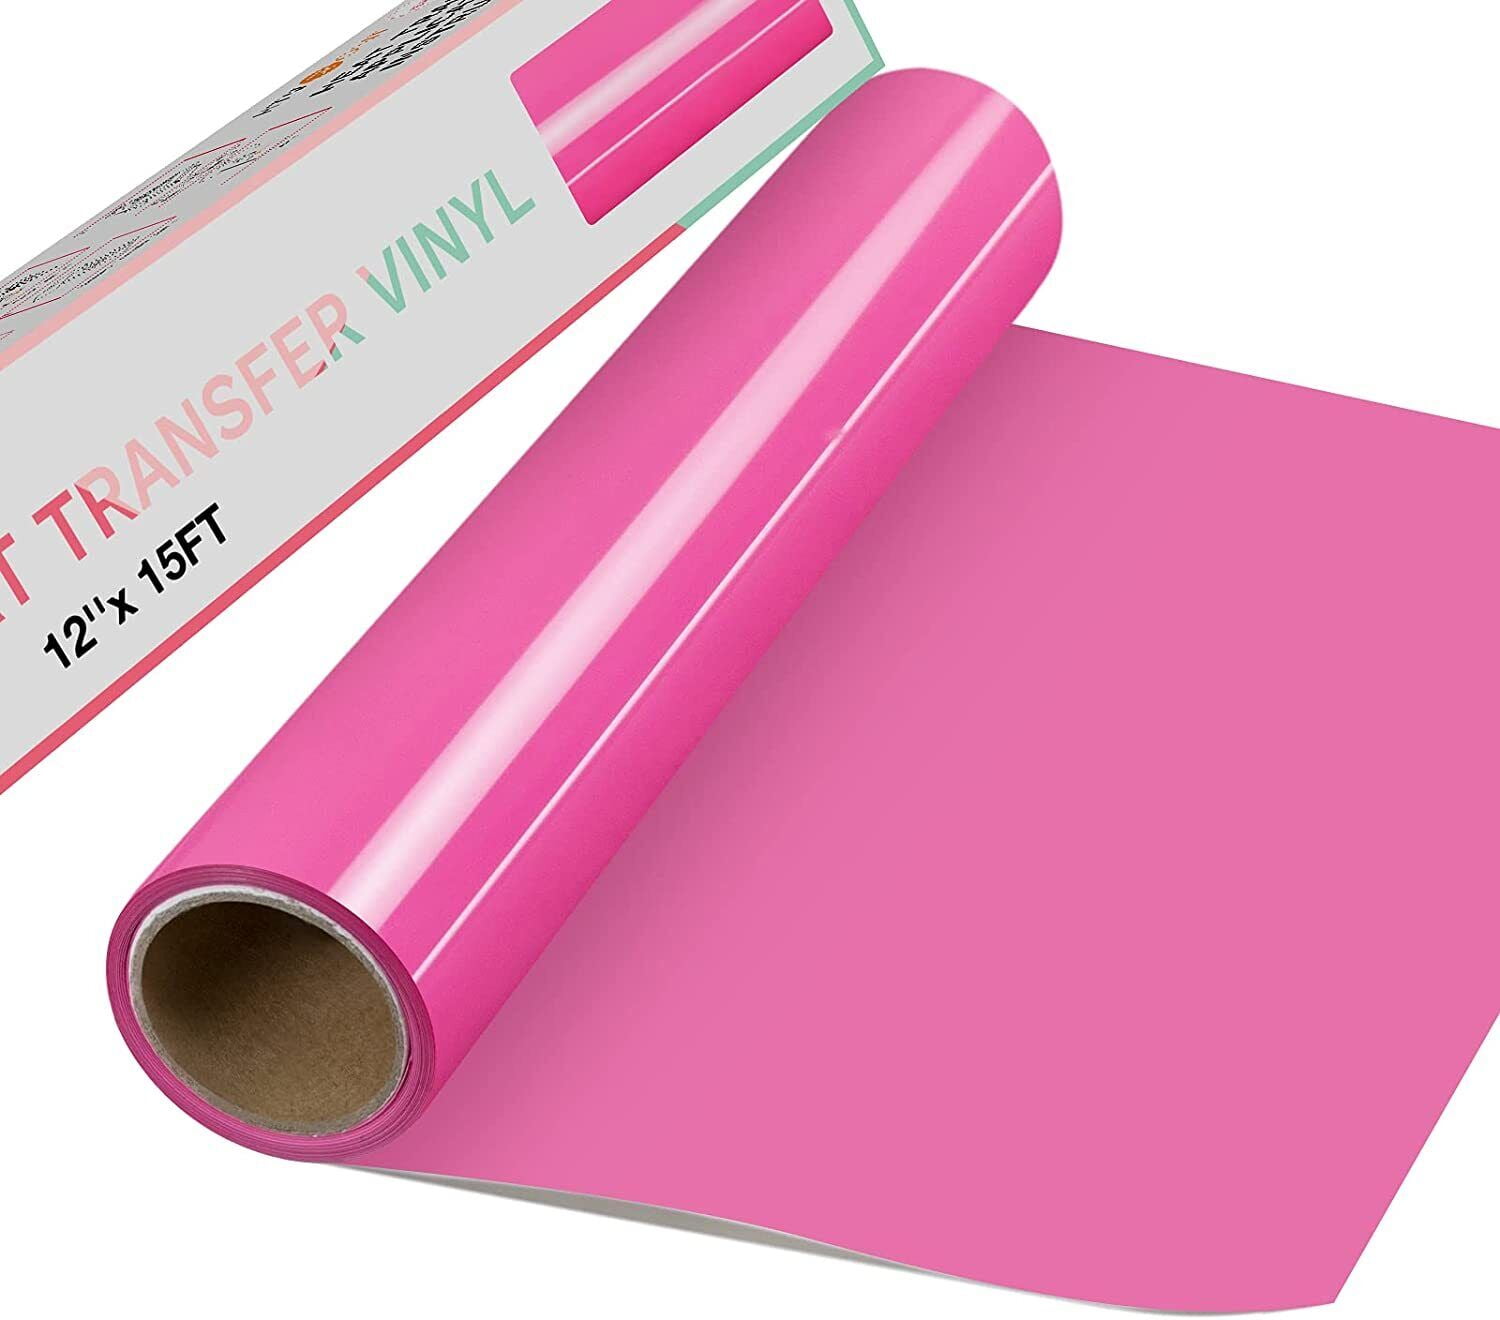 XSEINO Heat Transfer Vinyl, 12 x 50ft Pink HTV Vinyl Roll with Teflon for Shirts, Pink Iron on Vinyl Roll for Cricut & Cameo, Easy to Cut & Weed